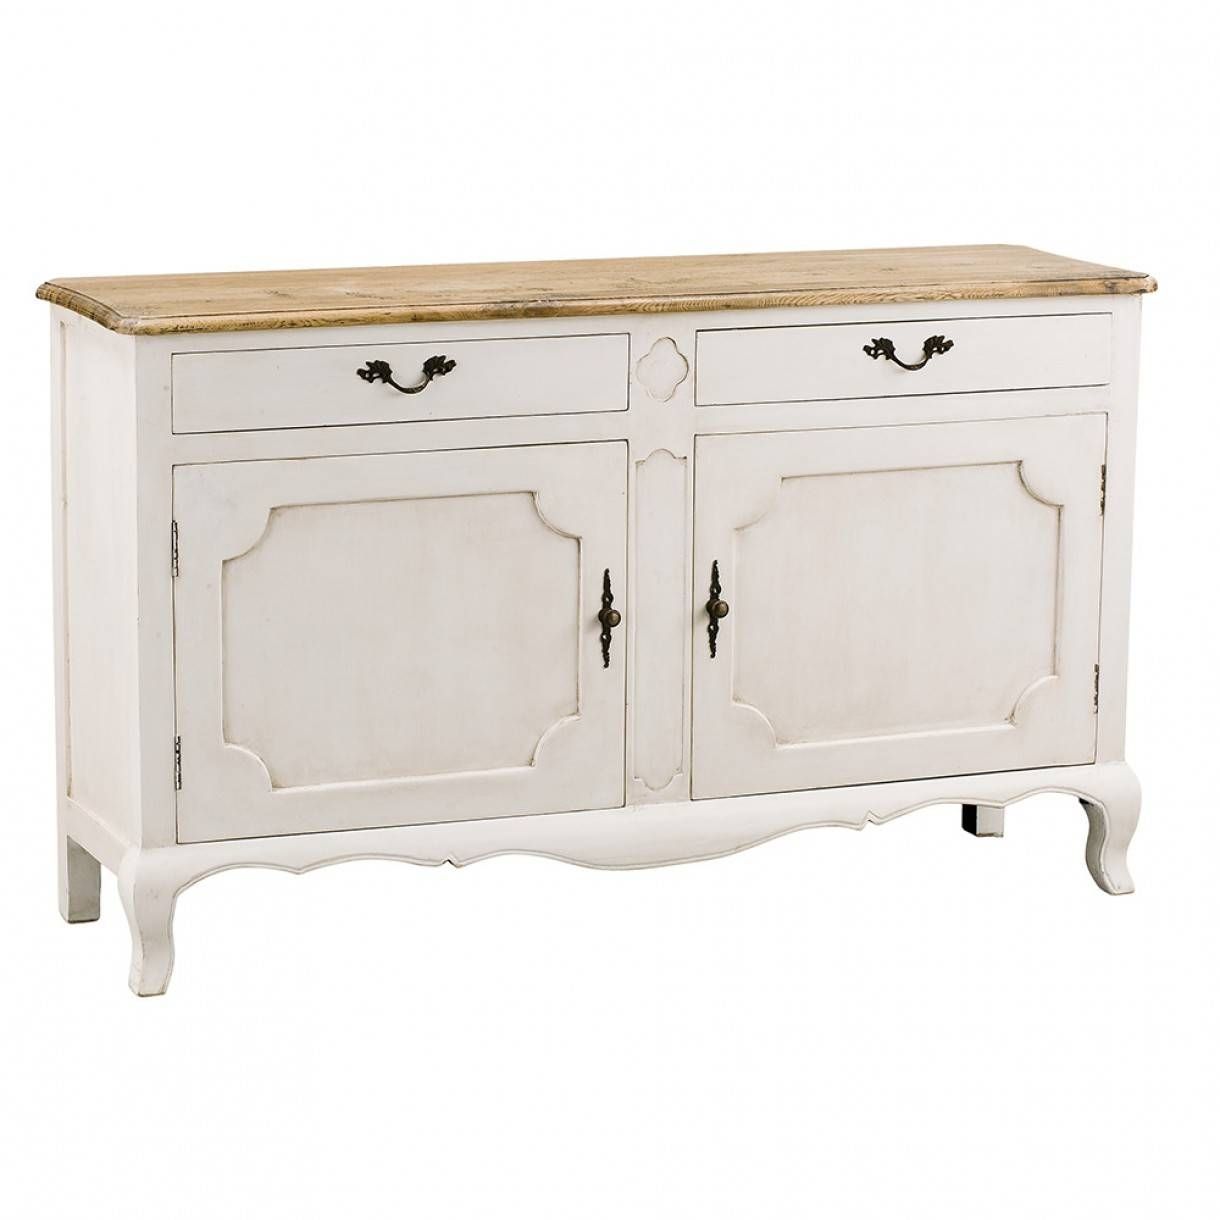 Oak Sideboard Distressed White Intended For Most Recently Released Distressed Buffet Sideboards (View 14 of 15)